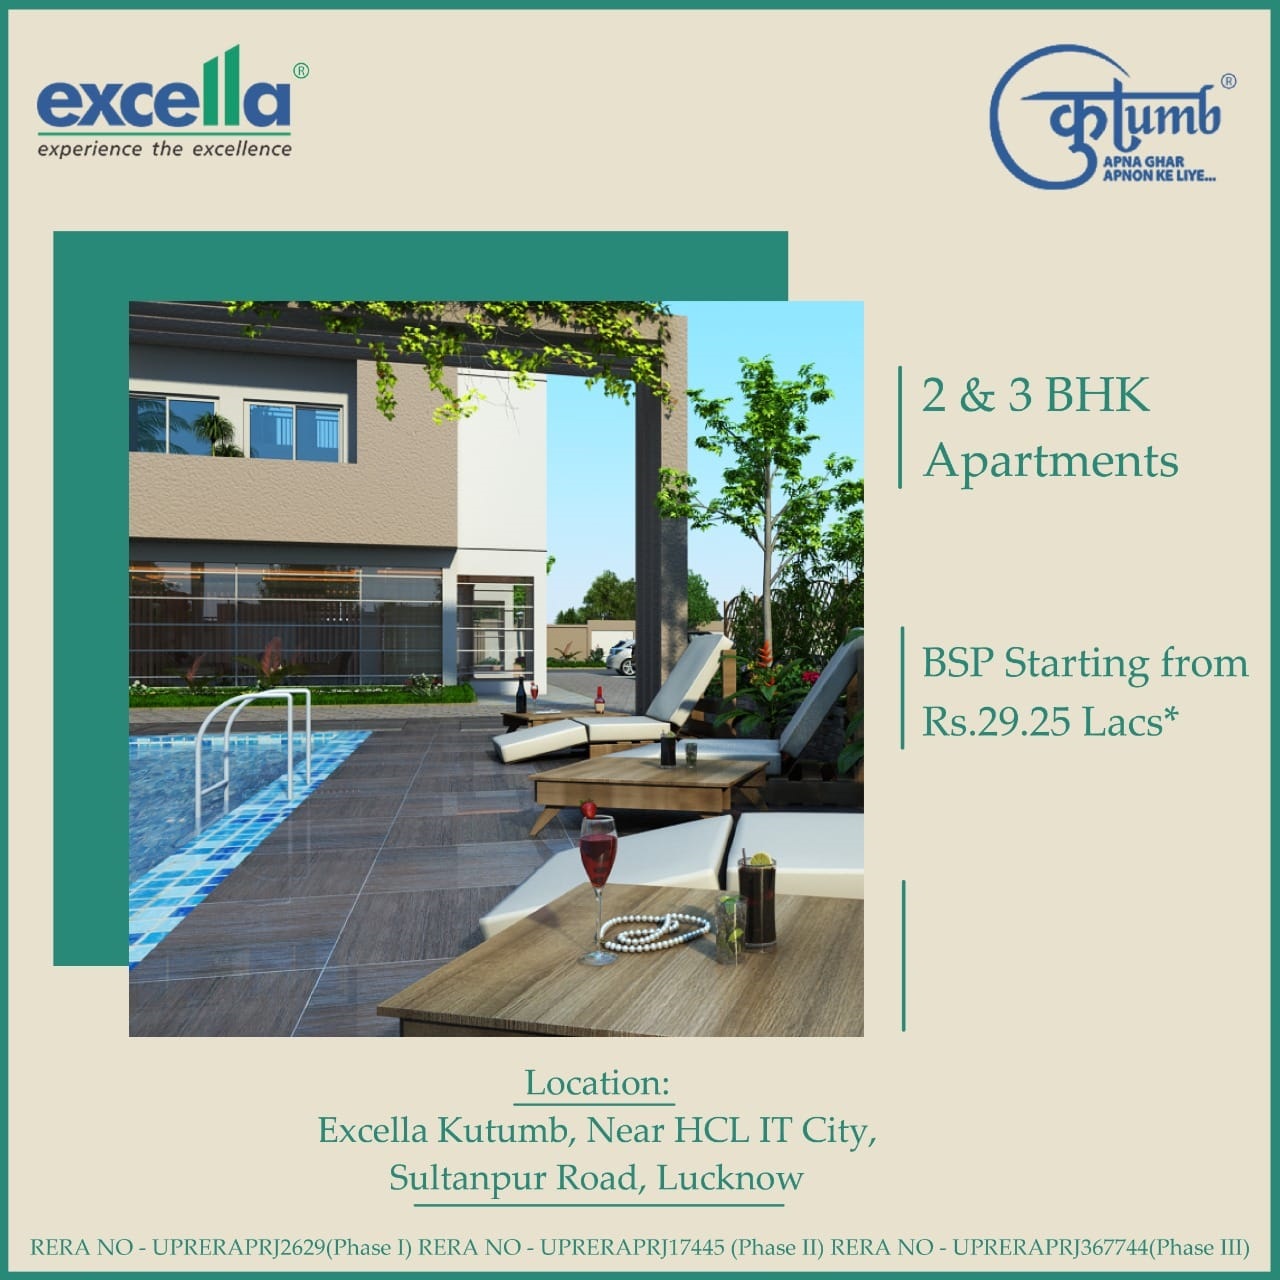 Book 2 & 3 BHK apartments BSP starting from Rs.29.25 Lac at Excella Kutumb in Gomti Nagar, Lucknow Update